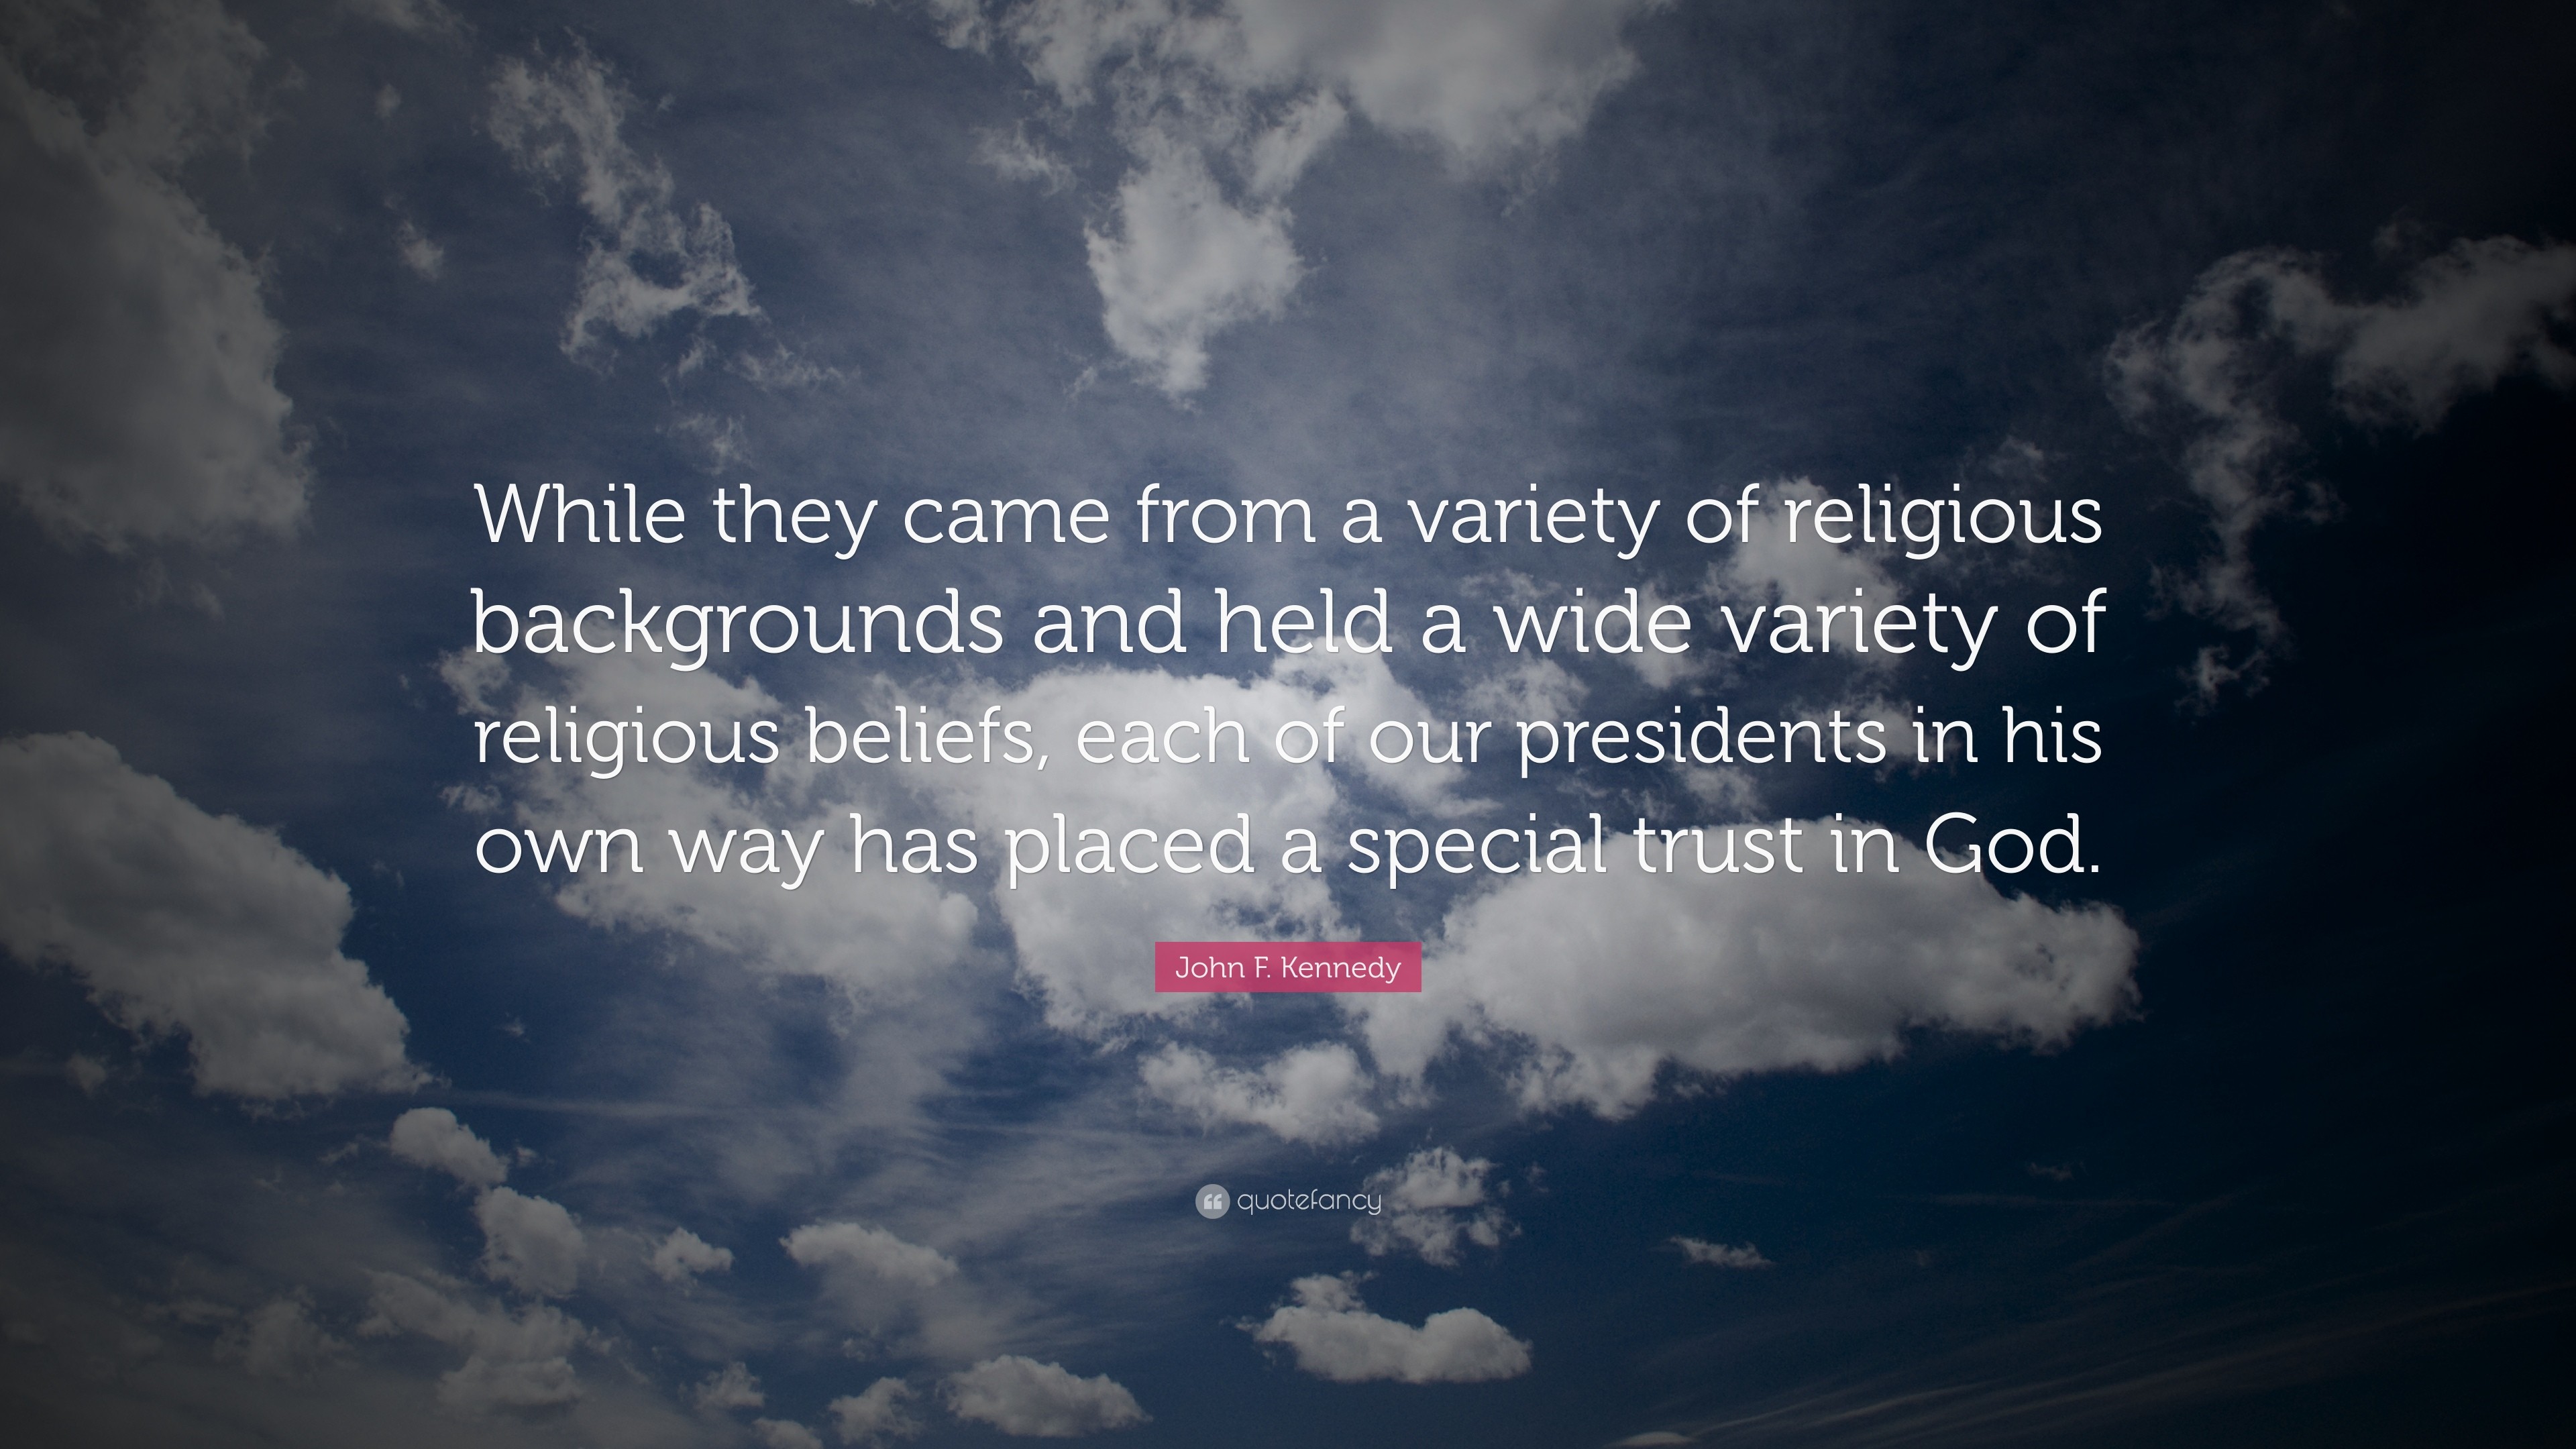 3840x2160 John F. Kennedy Quote: “While they came from a variety of religious  backgrounds